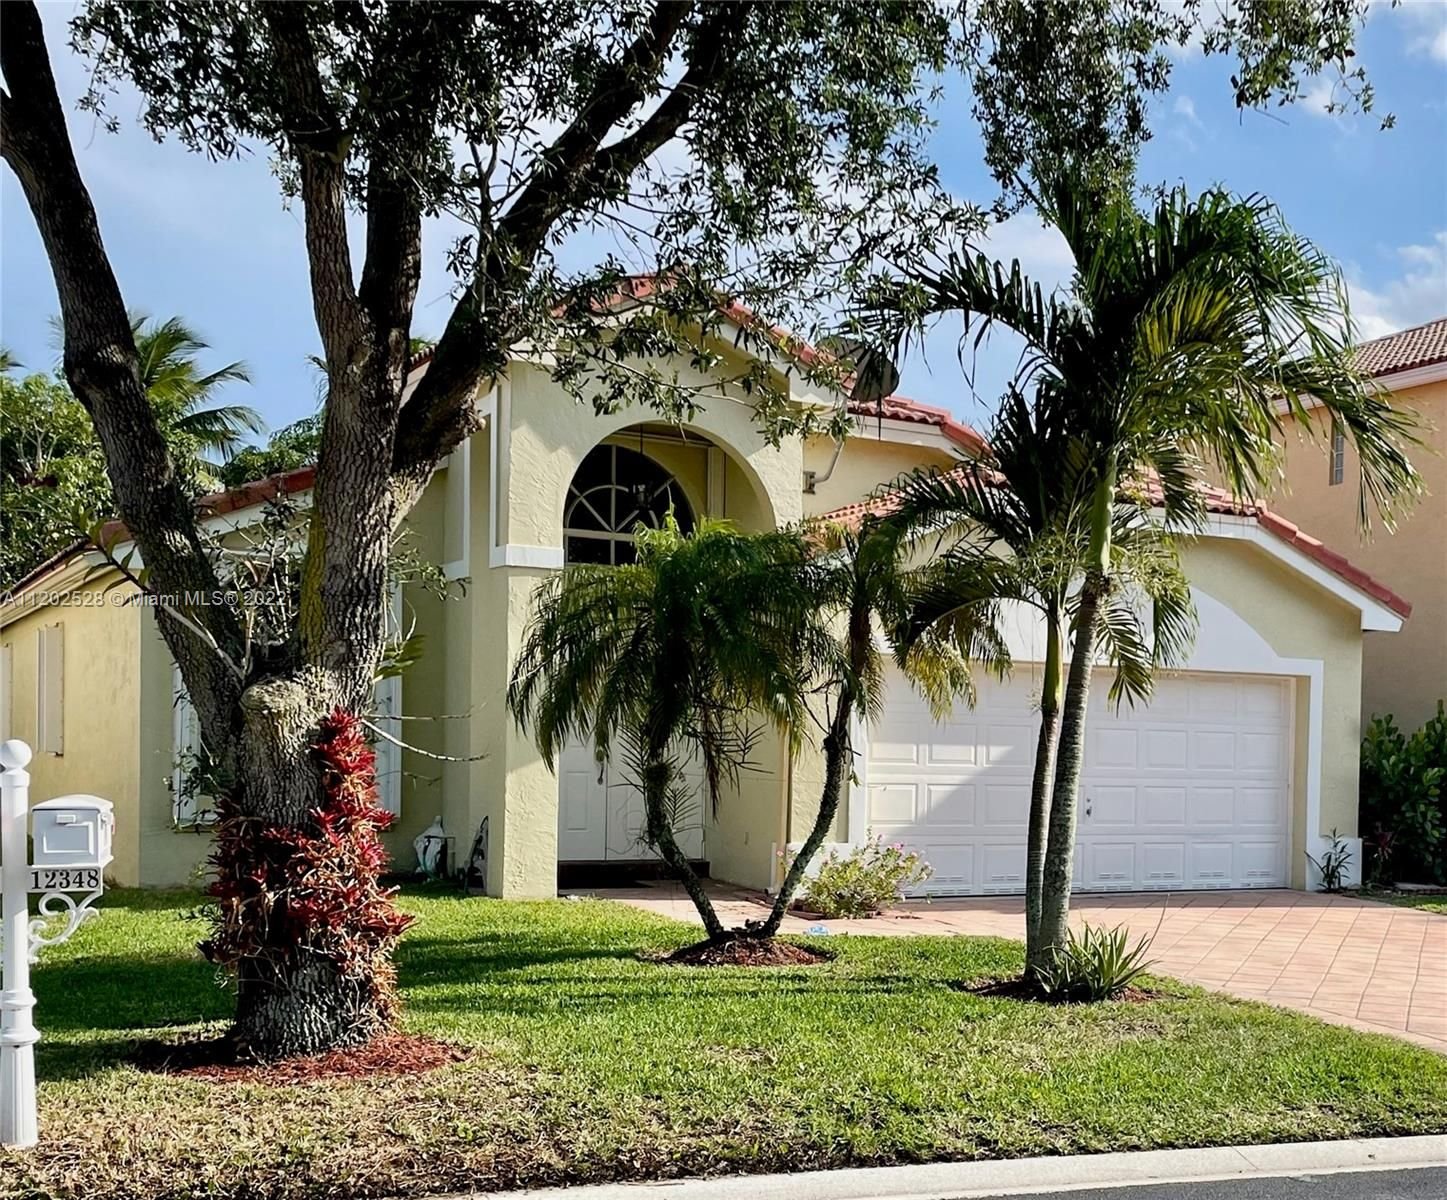 Real estate property located at 12348 53rd St, Broward County, Coral Springs, FL